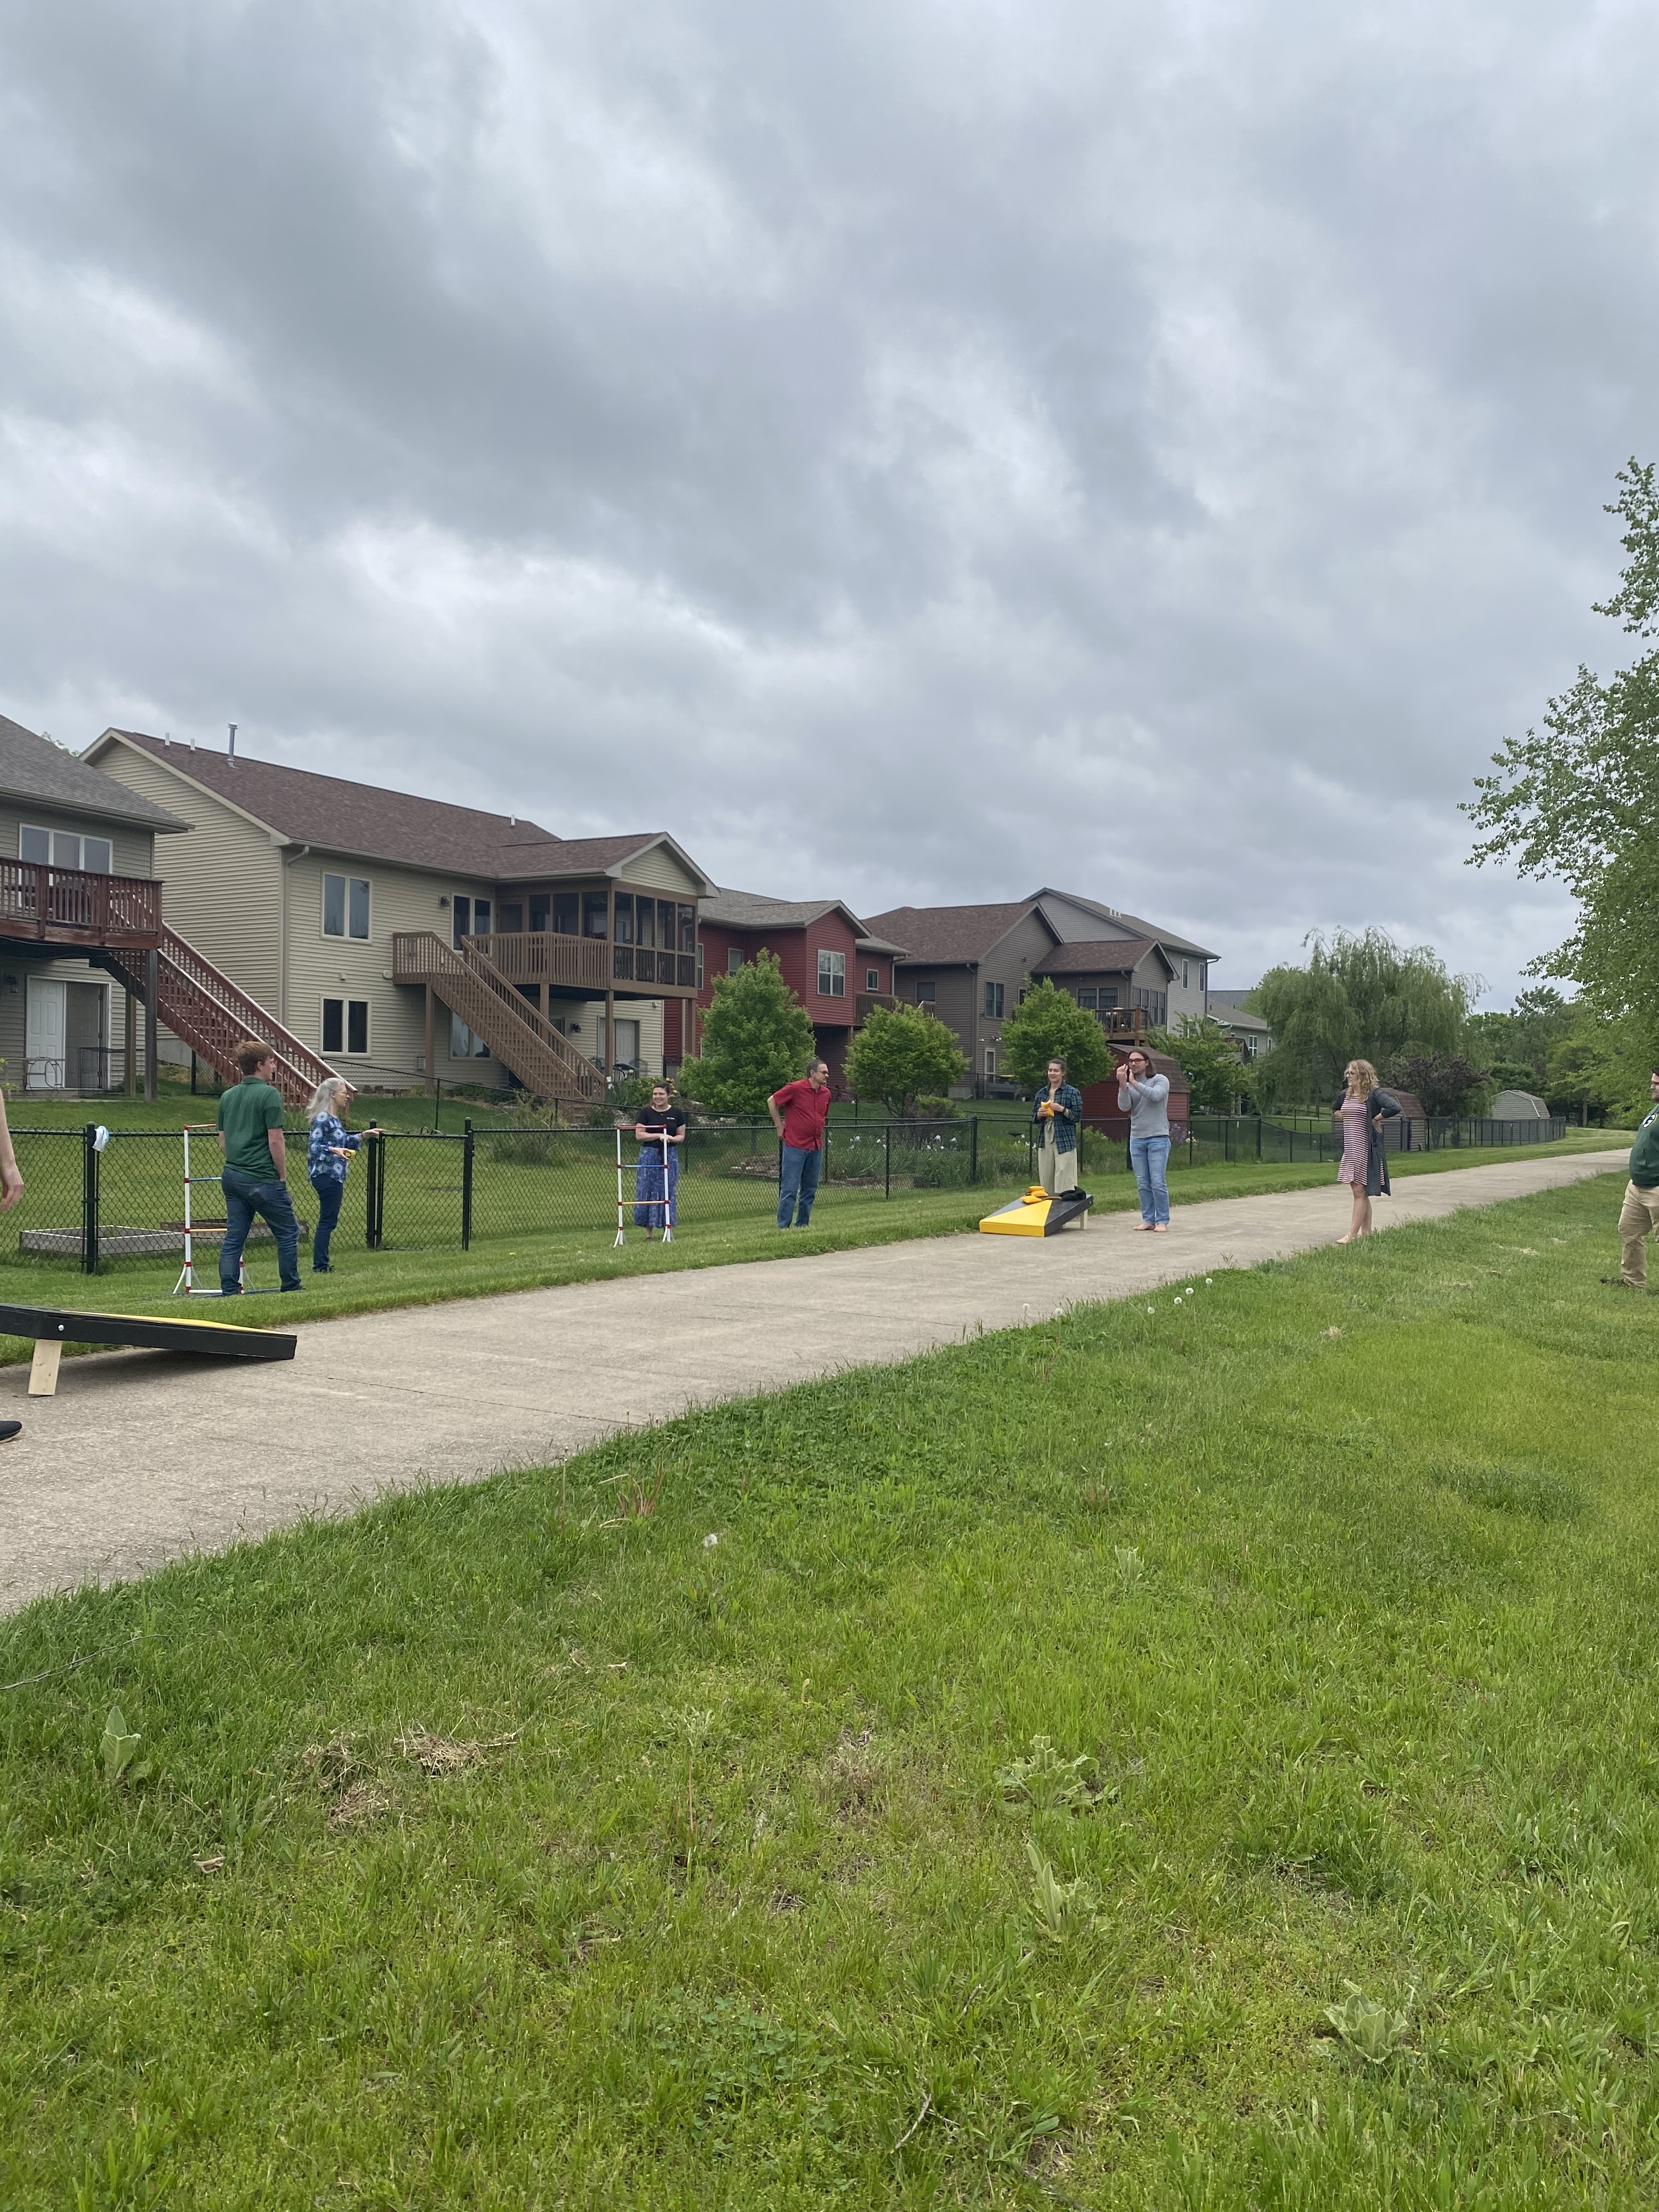 Cole group members and loved ones playing corn hole and setting up yard golf outside on a cloudy day